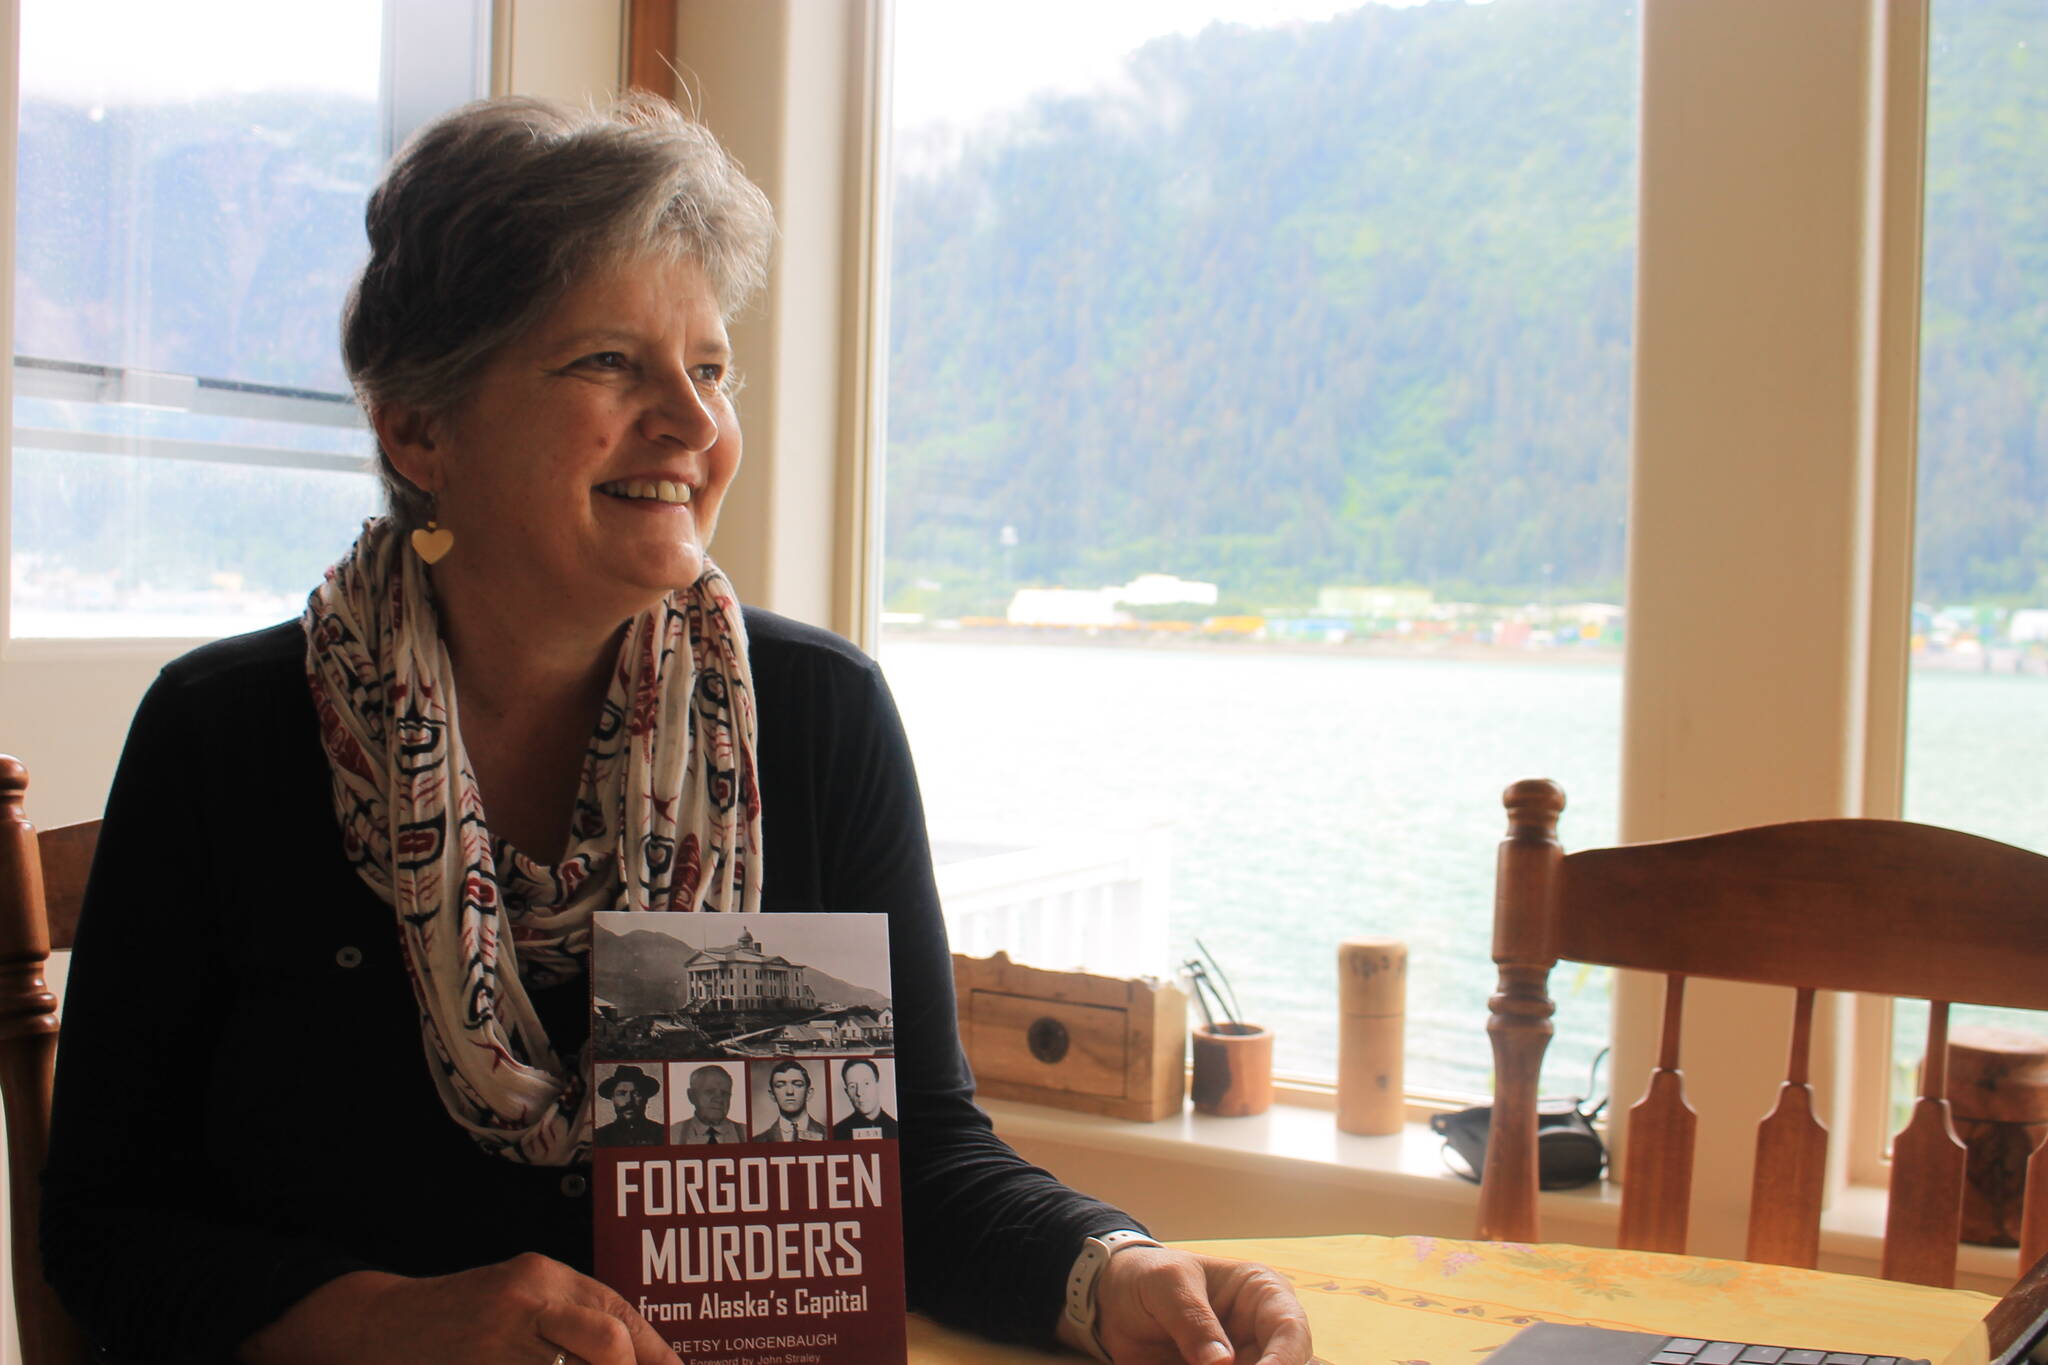 Betsy Longenbaugh sits at the table she spent the majority of her time writing her debut book, "Forgotten Murders from Alaska's Capital" which recounts 10 long-forgotten murders that occurred in the Juneau-Douglas area between 1902 and 1959. (Clarise Larson / Juneau Empire)